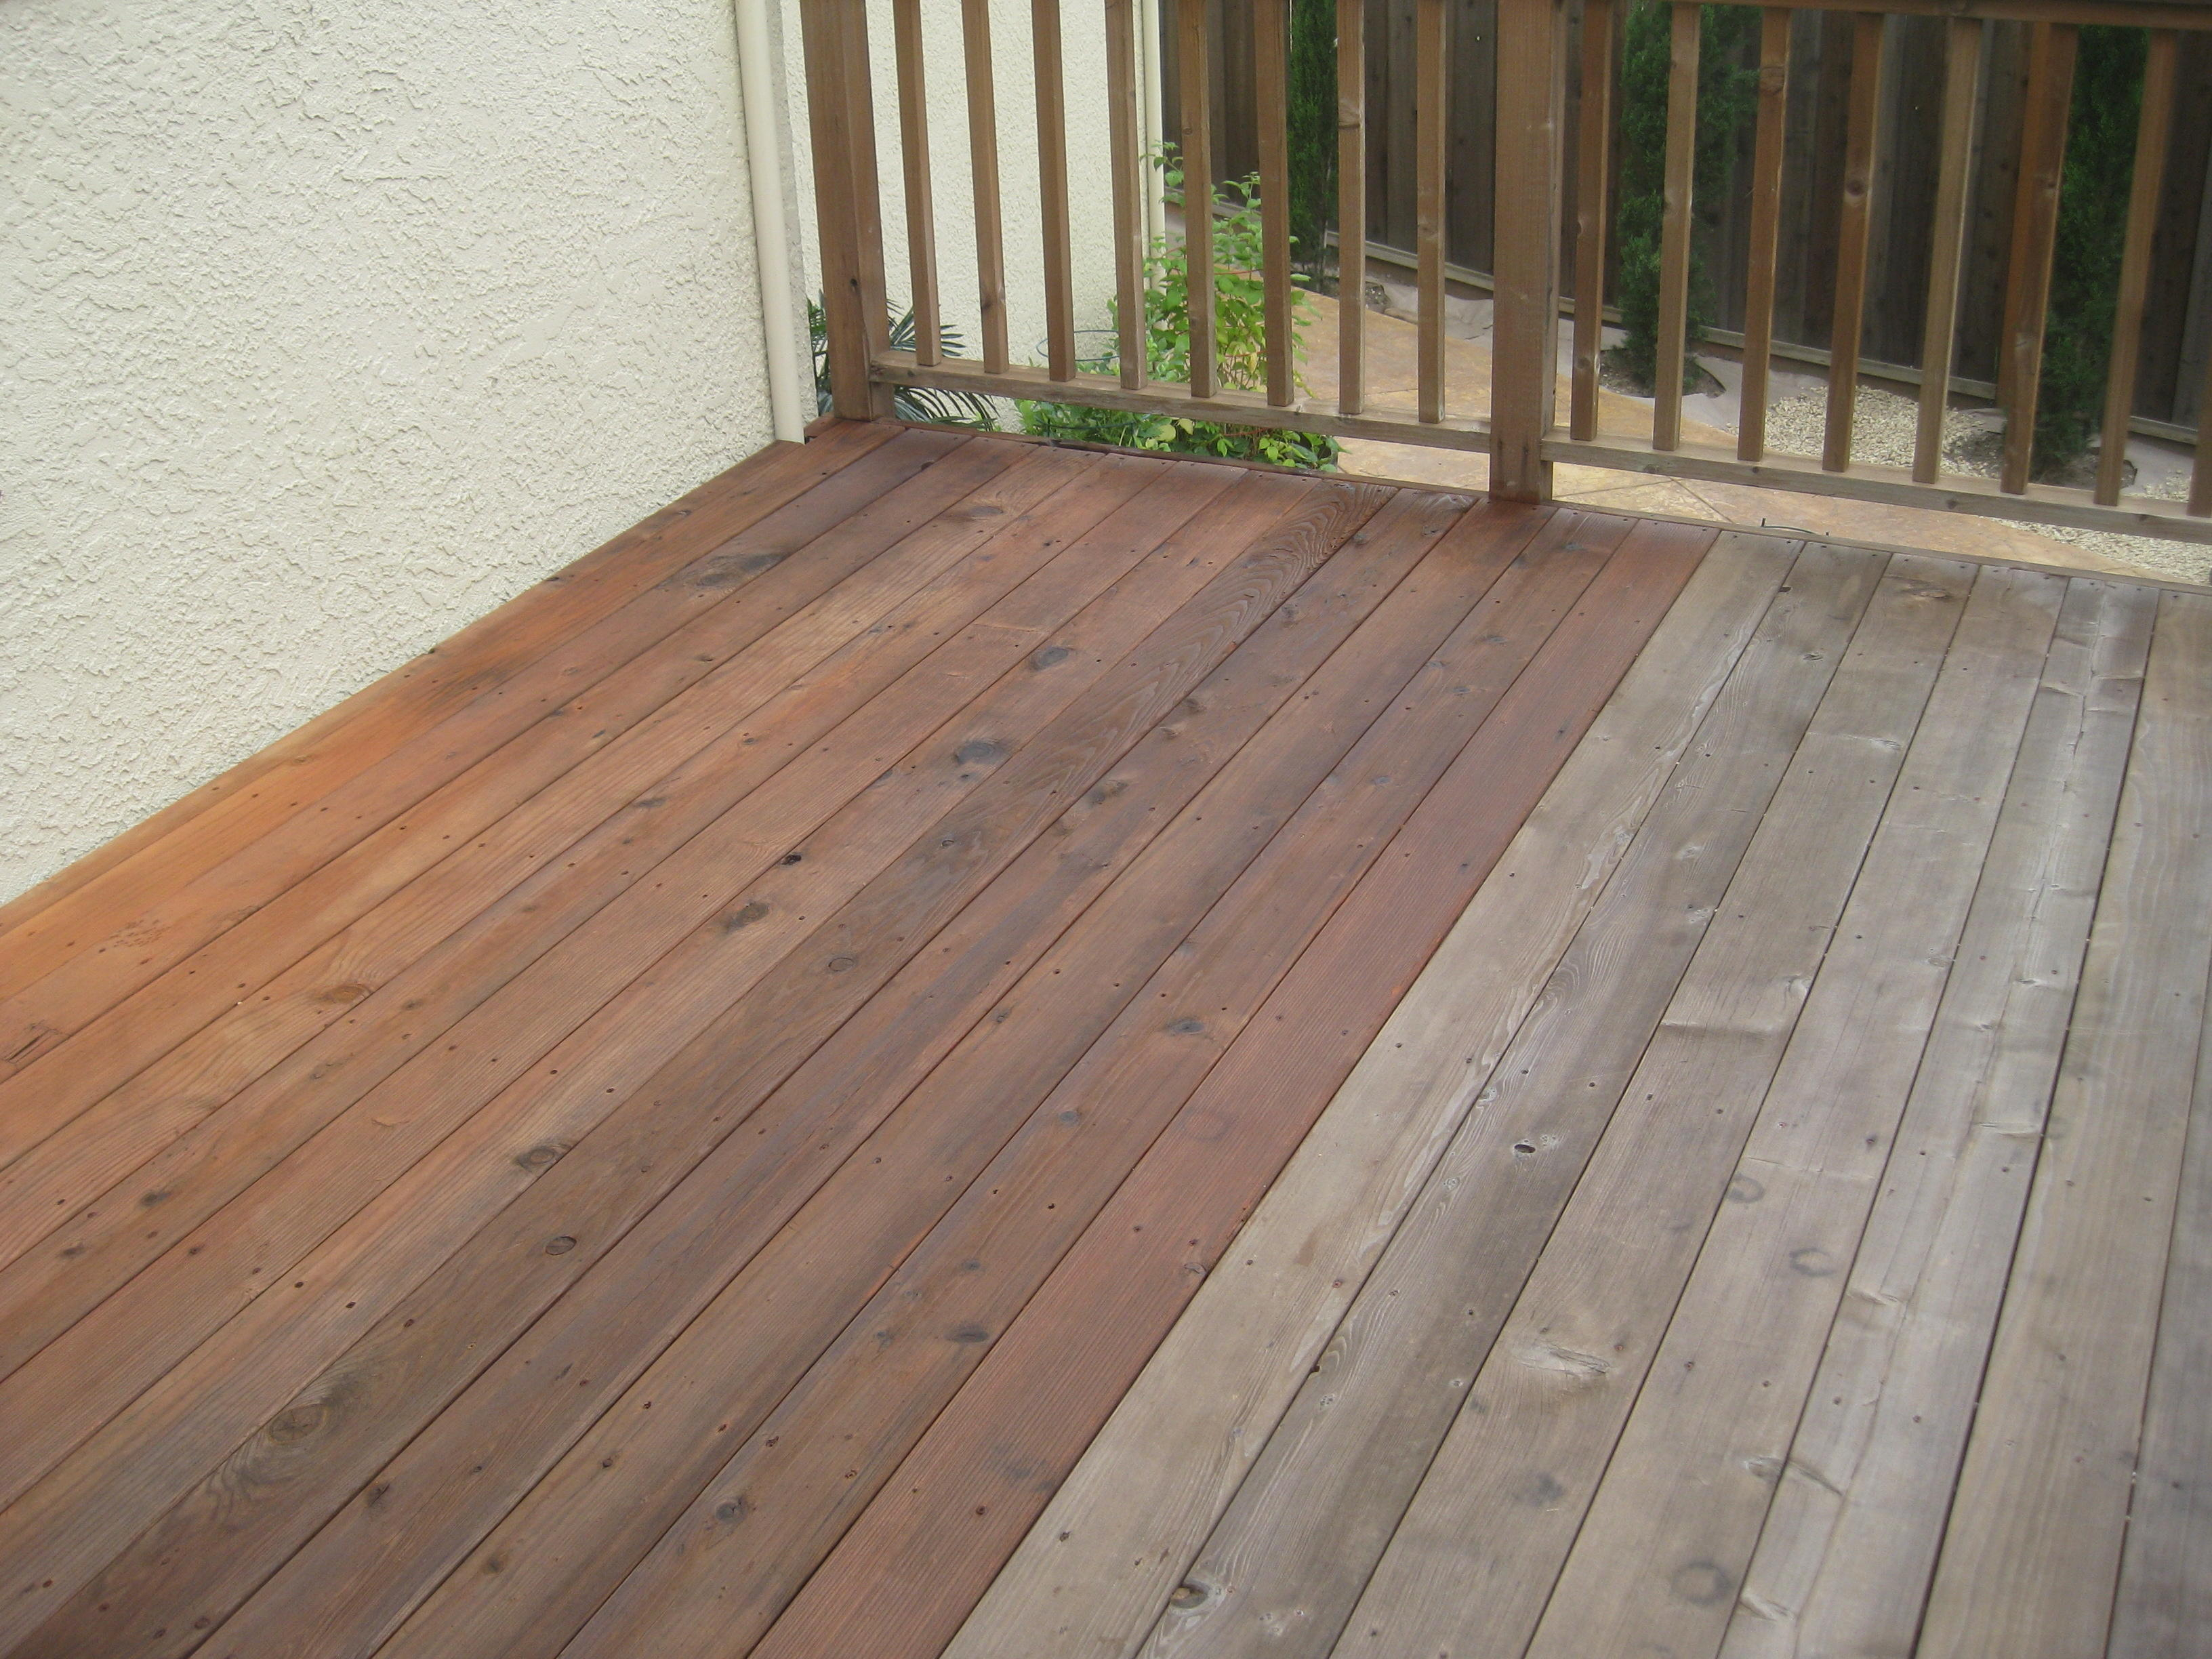 Preparing Old Deck For Staining Decks Ideas throughout proportions 3264 X 2448